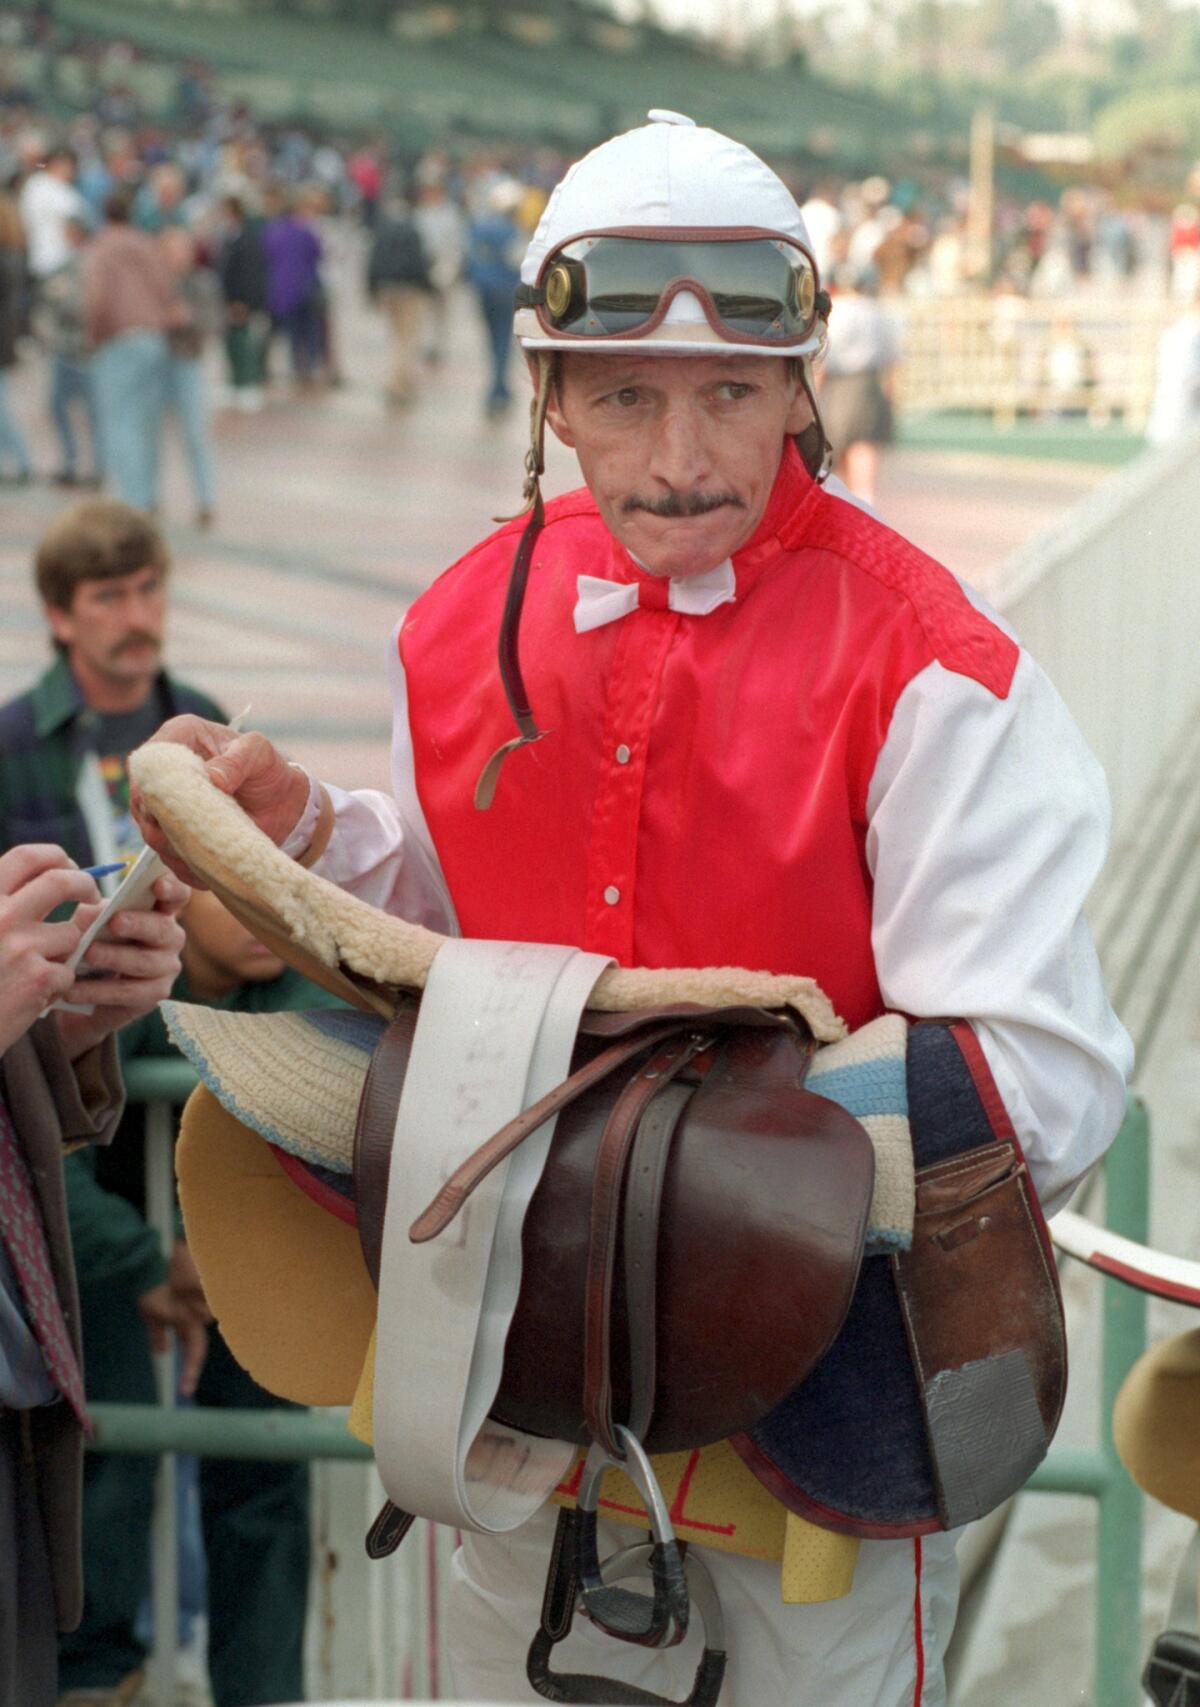 Jerry Lambert watches the scales after completing a race at Santa Anita in 1996.